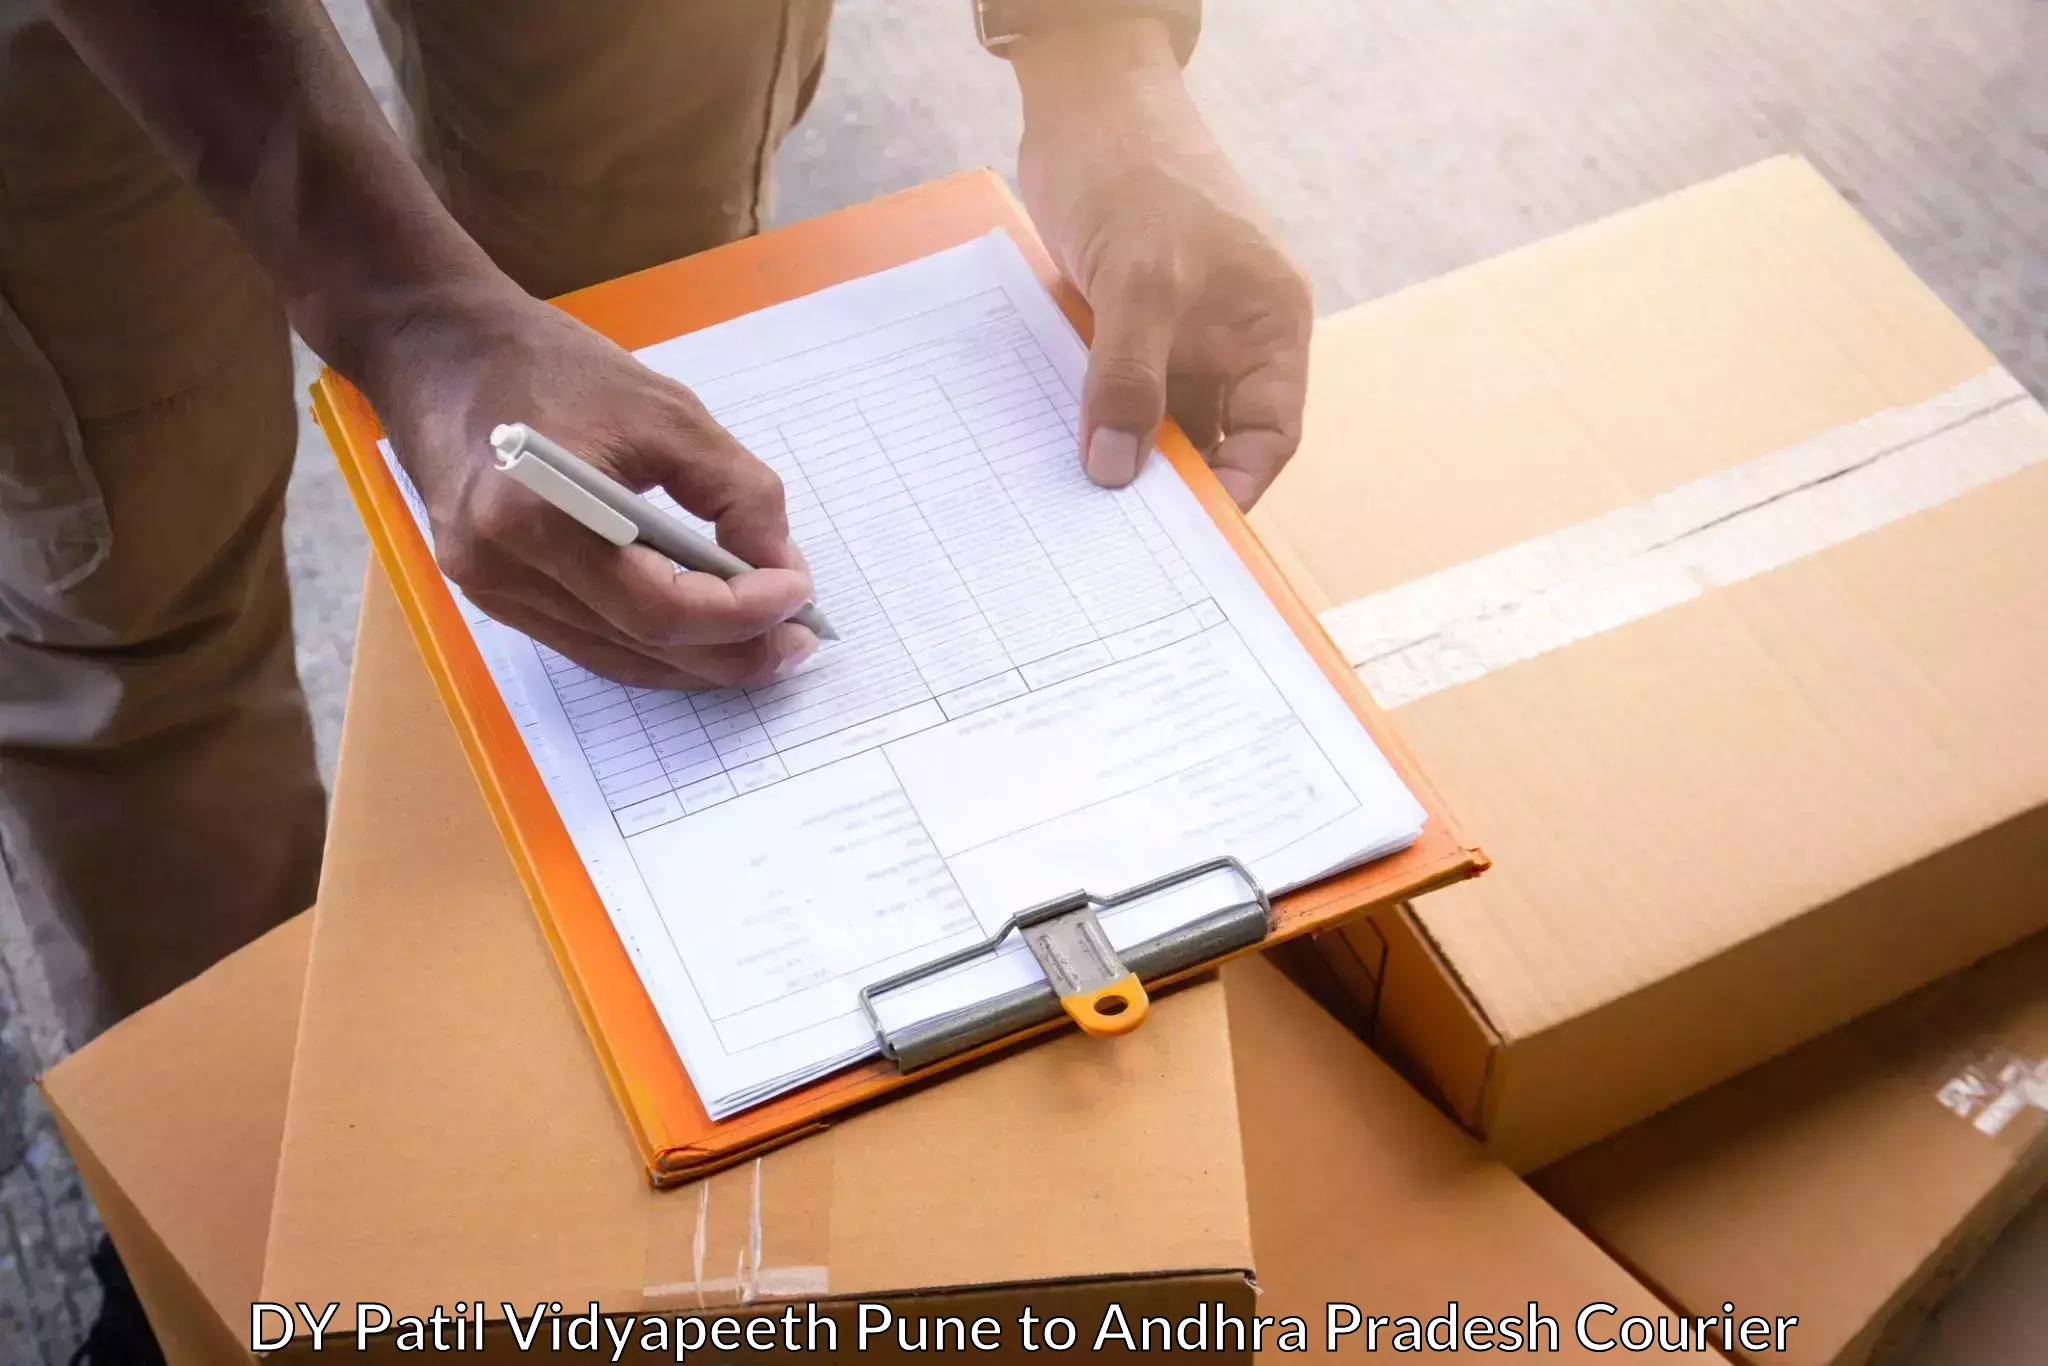 Express package services DY Patil Vidyapeeth Pune to Garividi